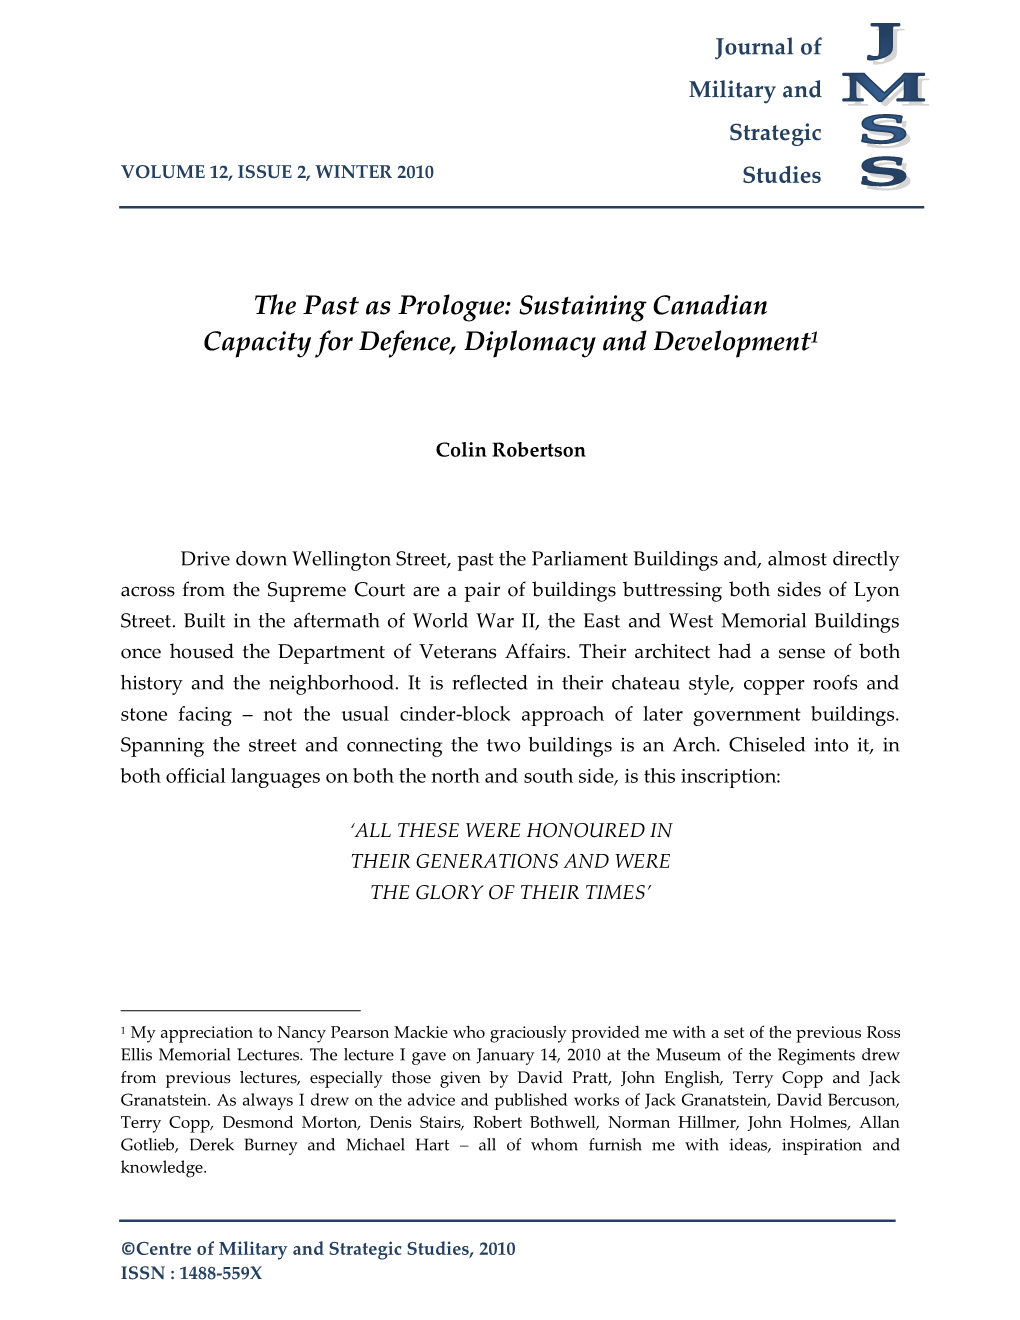 Sustaining Canadian Capacity for Defence, Diplomacy and Development1